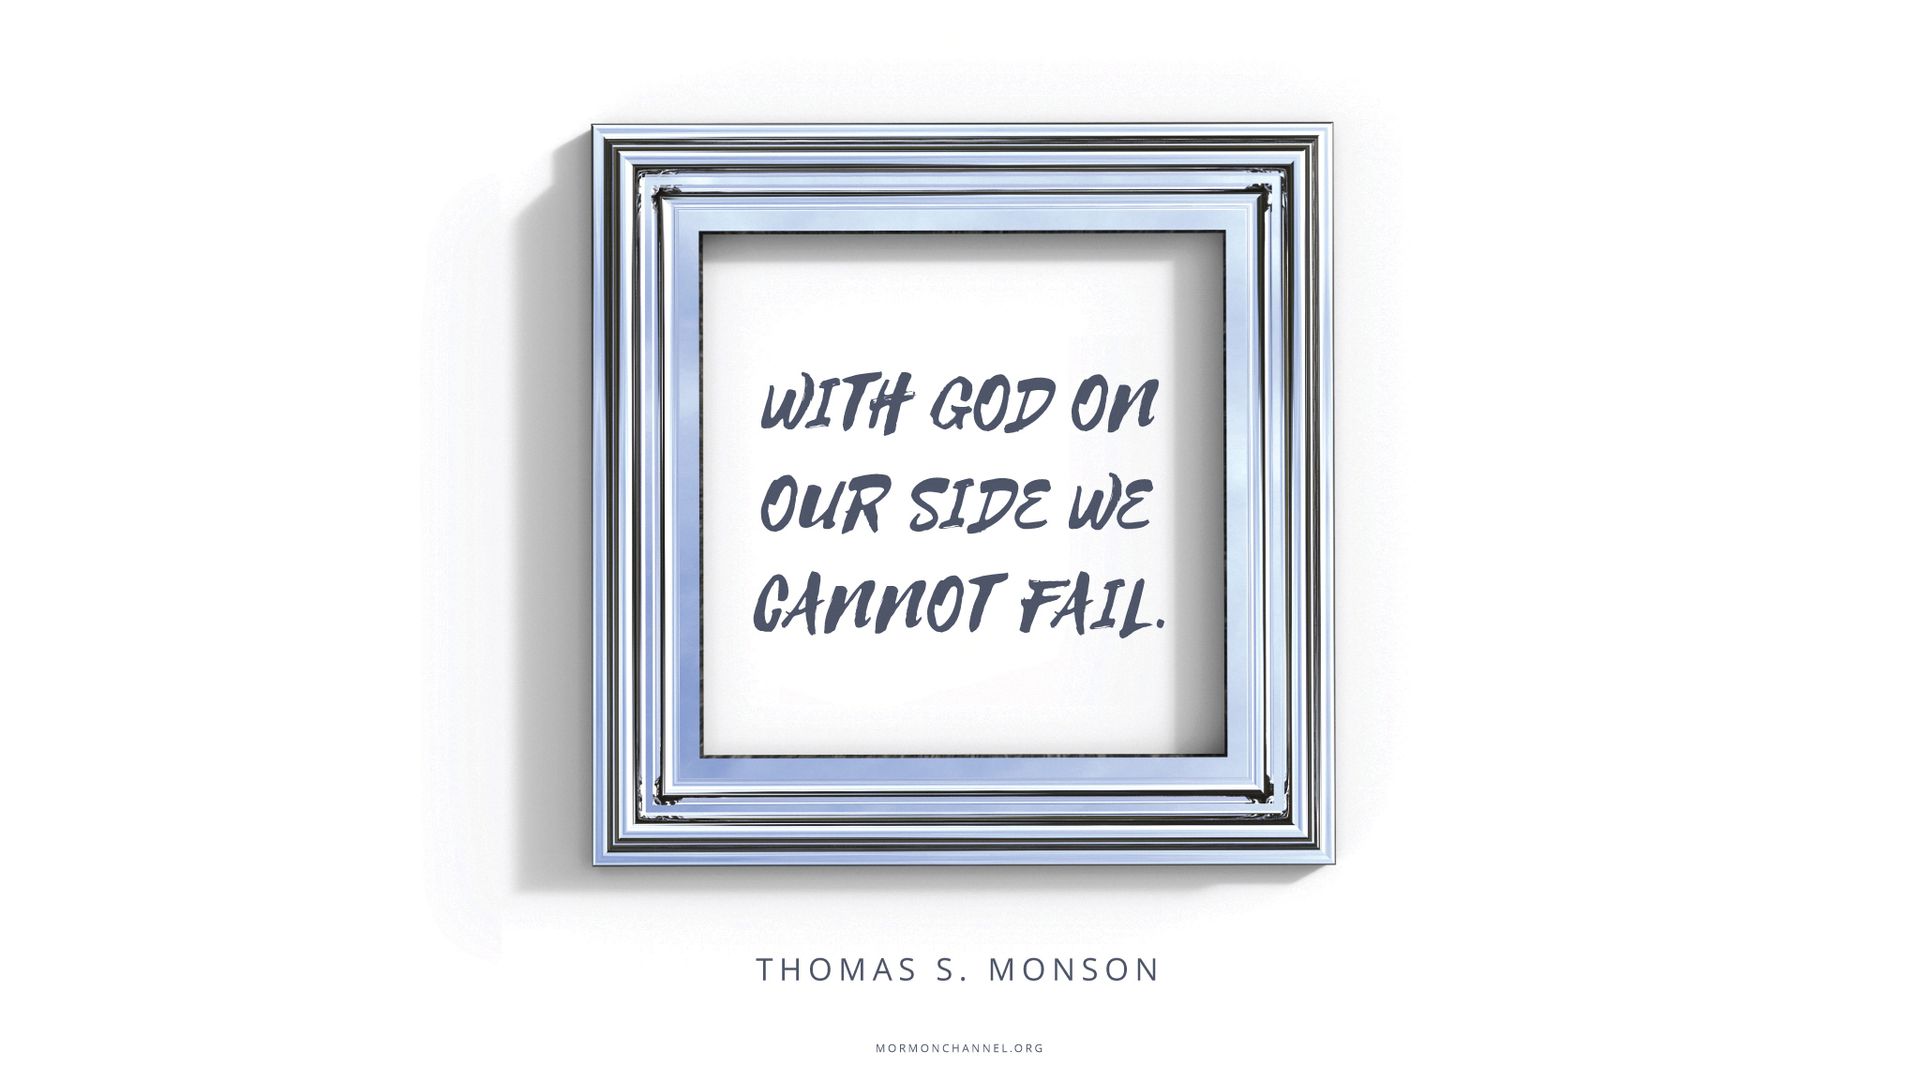 “With God on our side we cannot fail.”—President Thomas S. Monson, “Be Your Best Self”